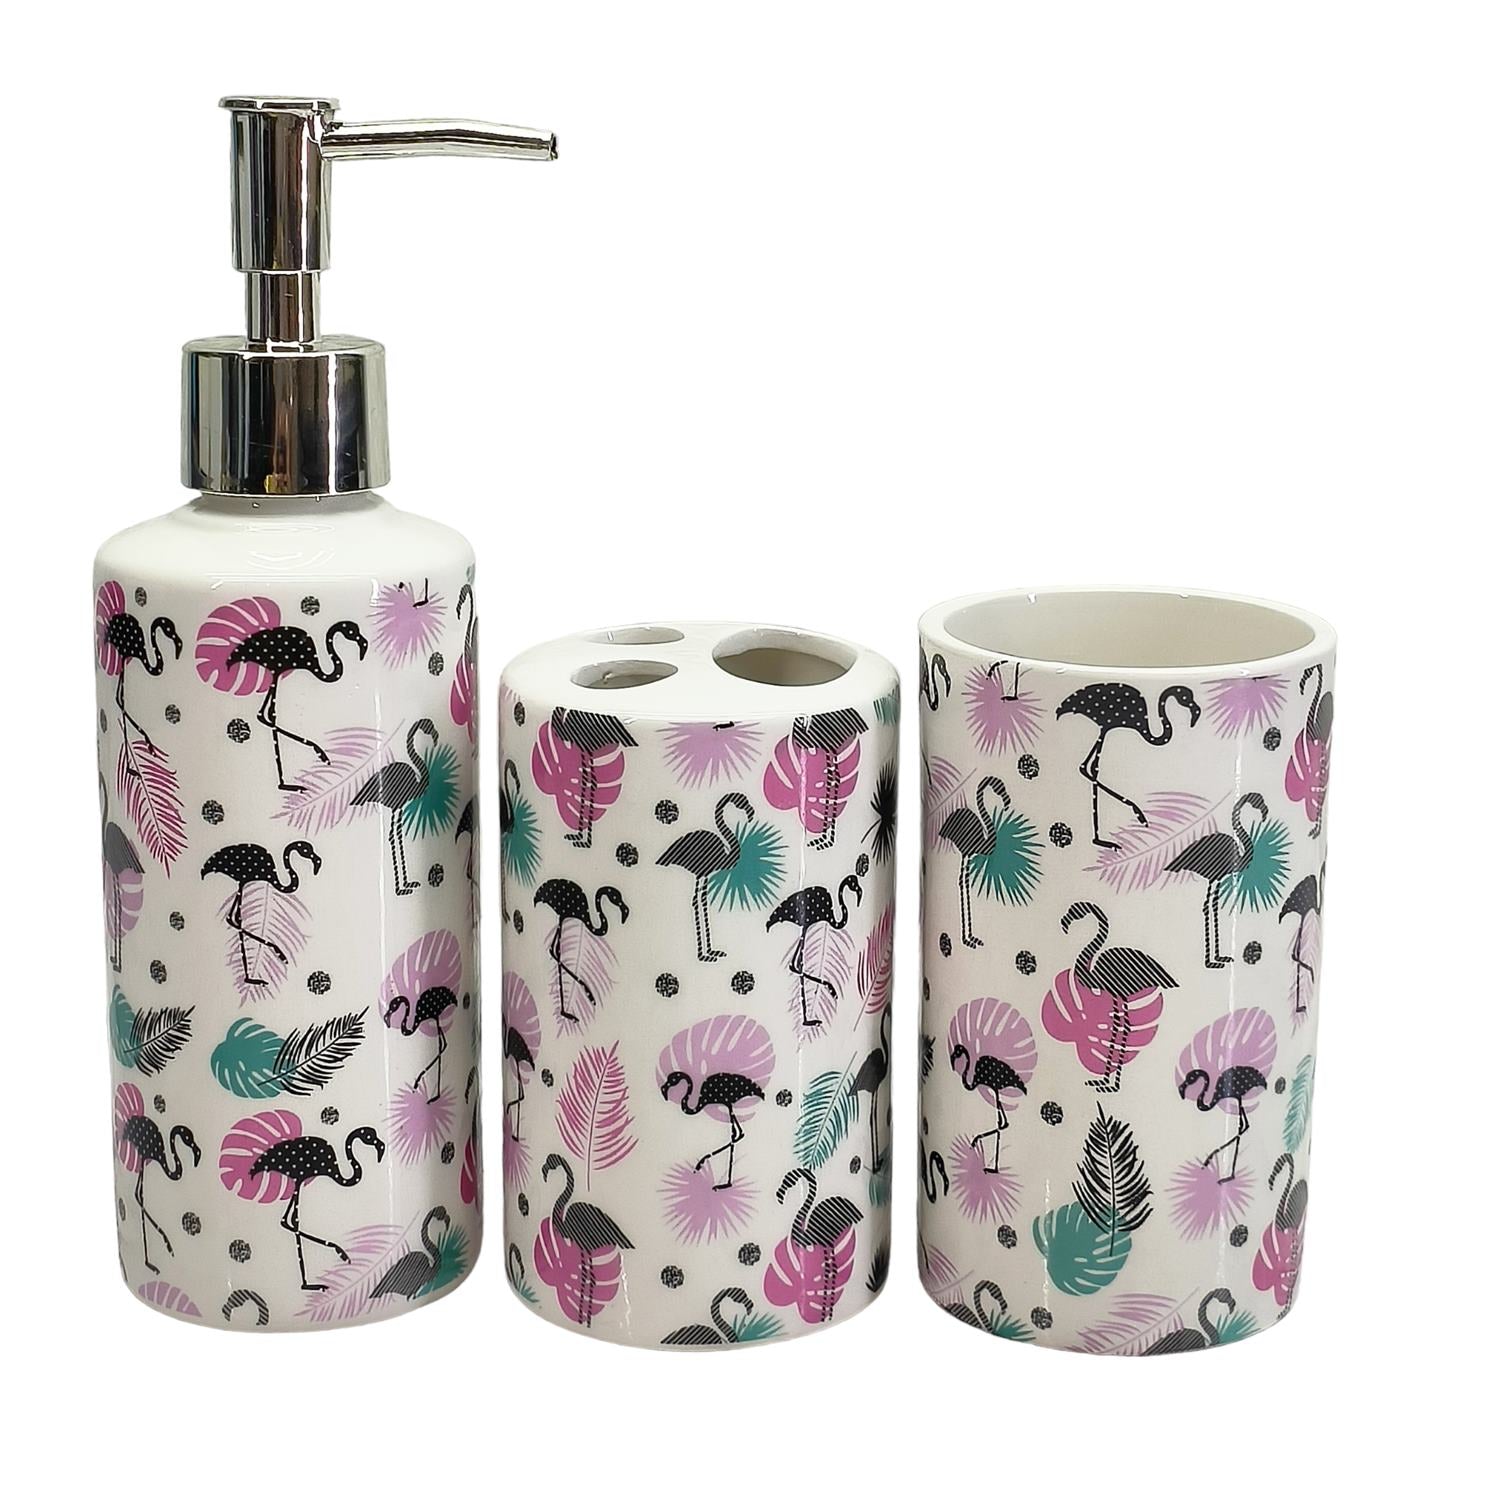 Ceramic Soap Dispenser Set with Toothbrush Holder and Tumbler, Set of 3 Bathroom Accessories for Home (C3059)